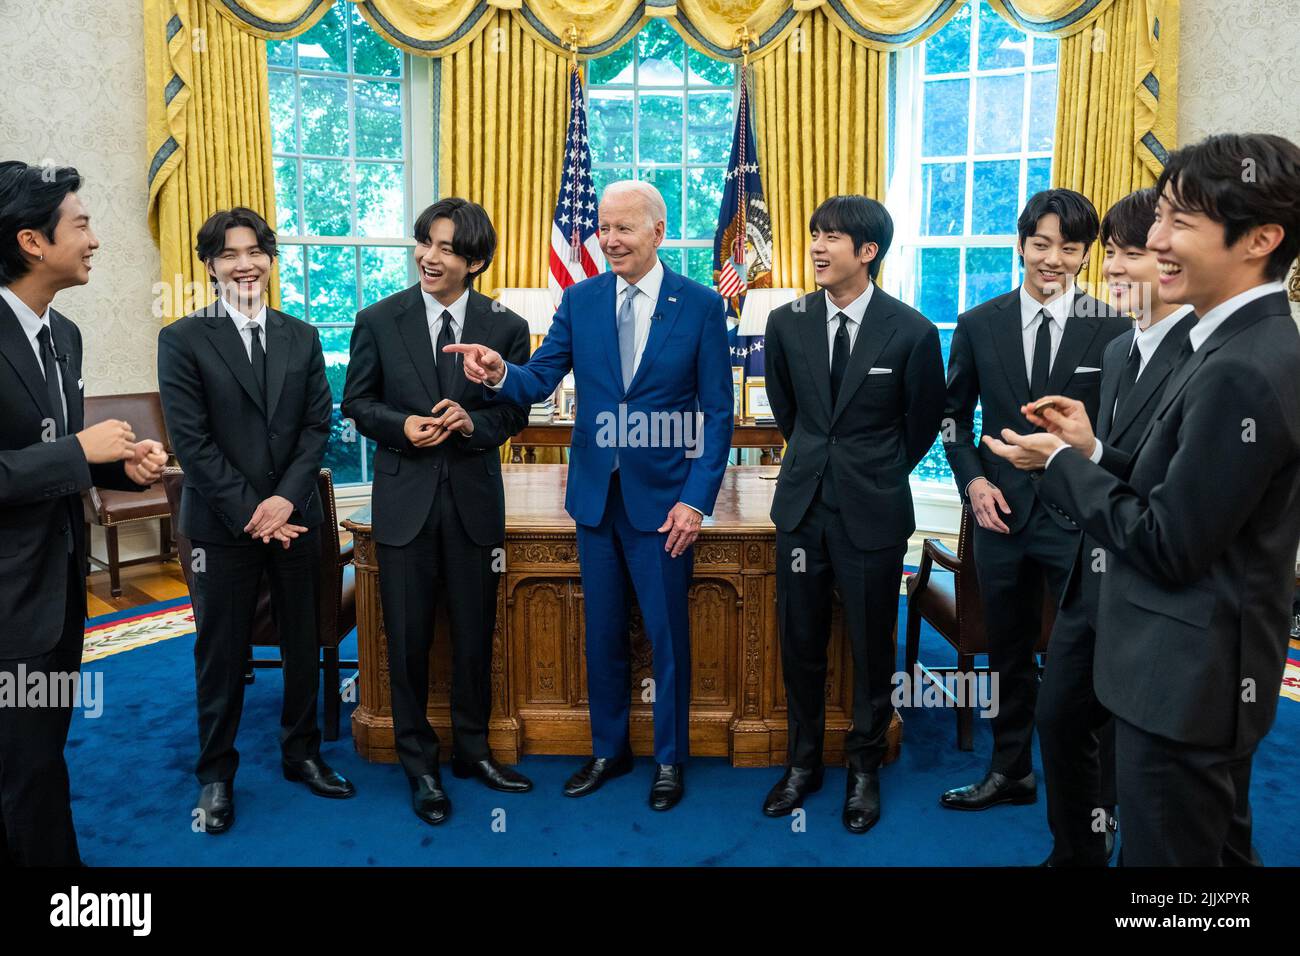 Washington, United States of America. 01 June, 2022. U.S. President Joe Biden chats with members of the K-Pop band BTS in the Oval Office of the White House, May 31, 2022, in Washington, D.C. Credit: Adam Schultz/White House Photo/Alamy Live News Stock Photo